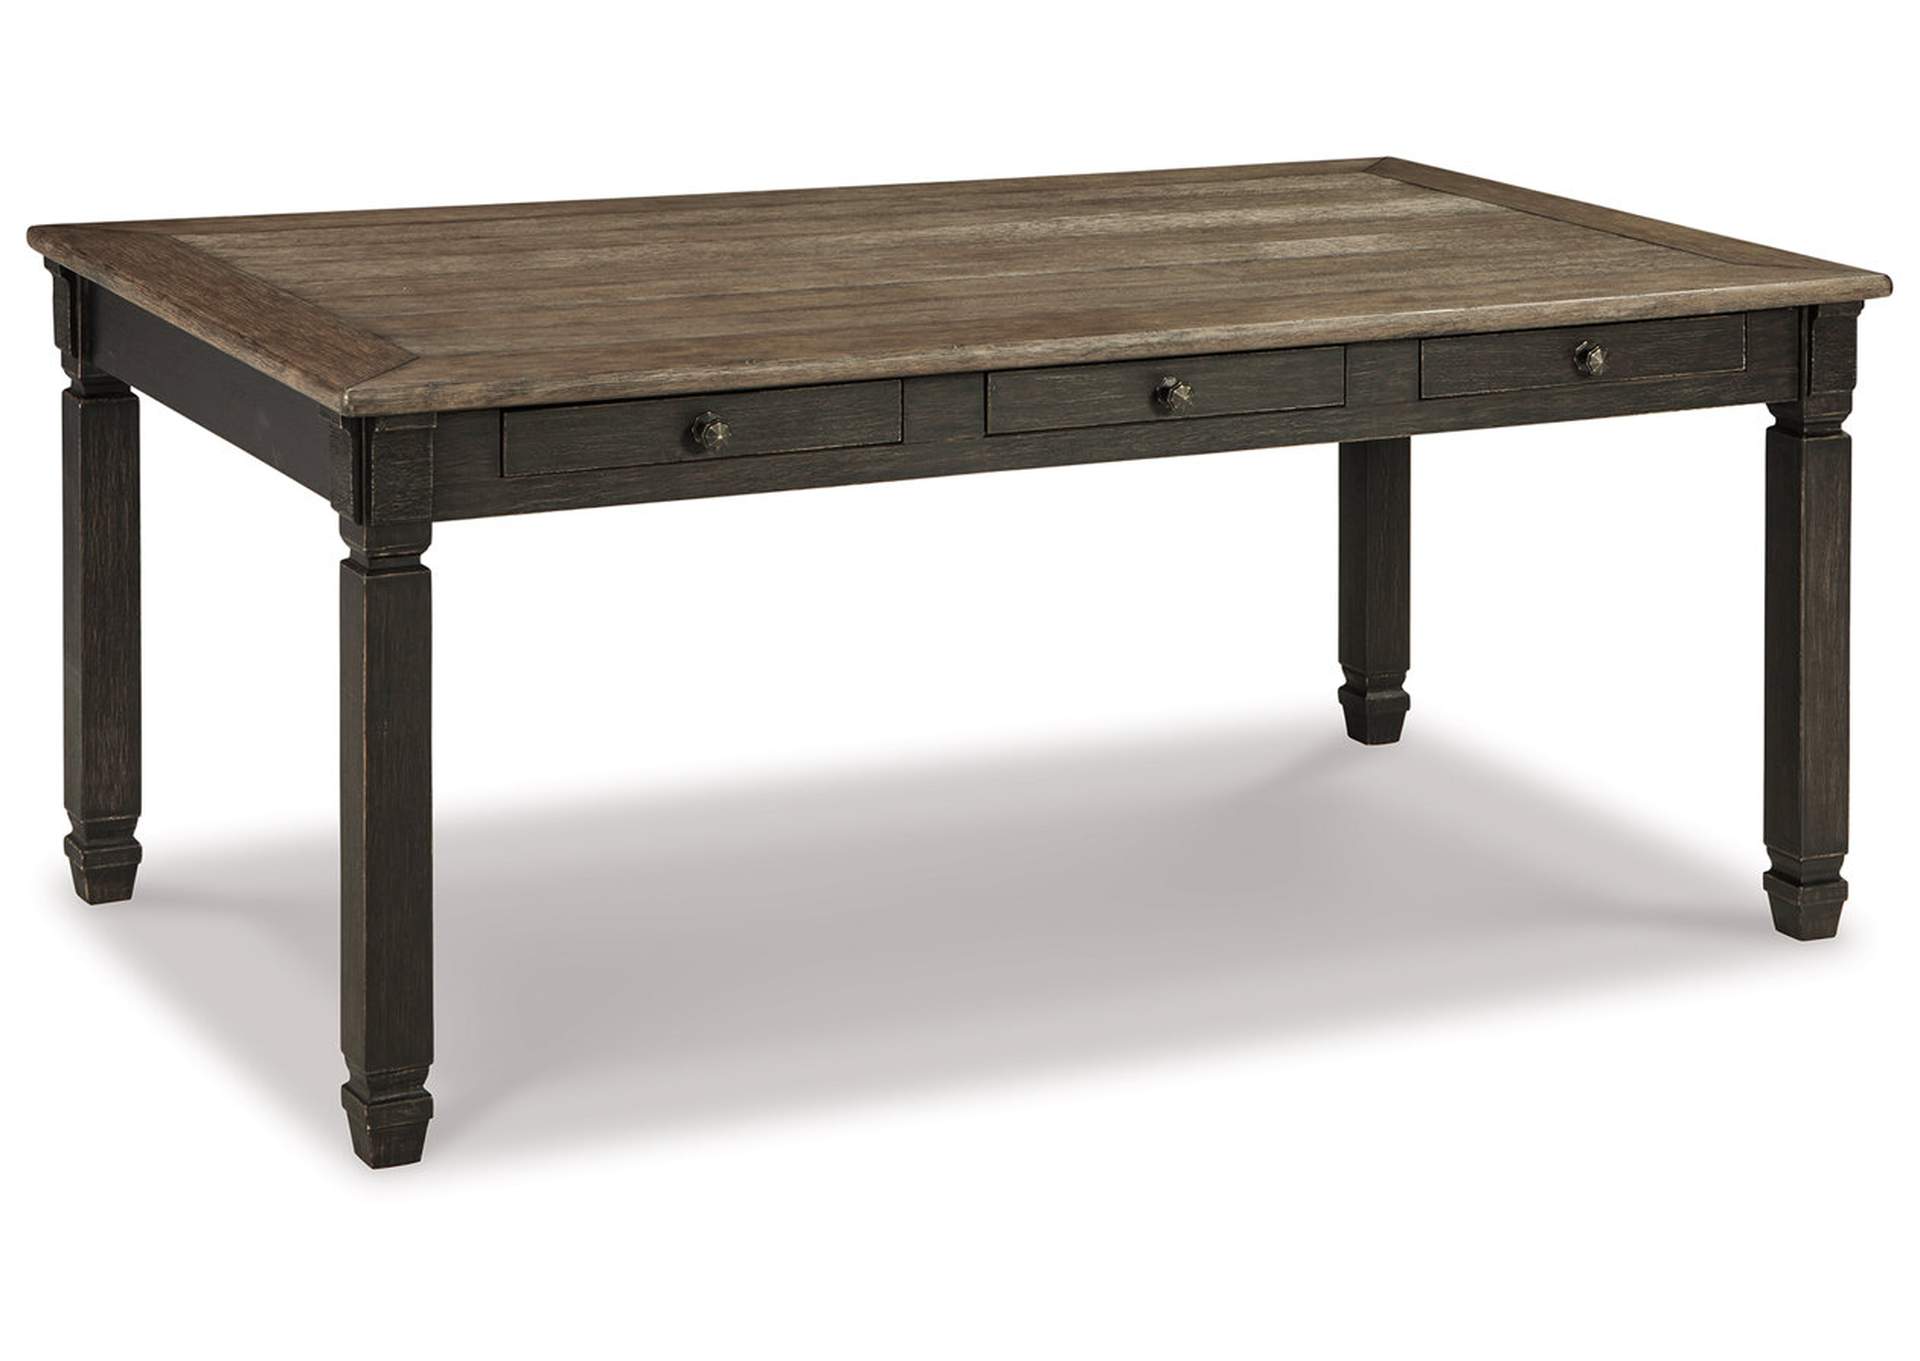 Tyler Creek Dining Table with 4 Chairs and Bench,Signature Design By Ashley